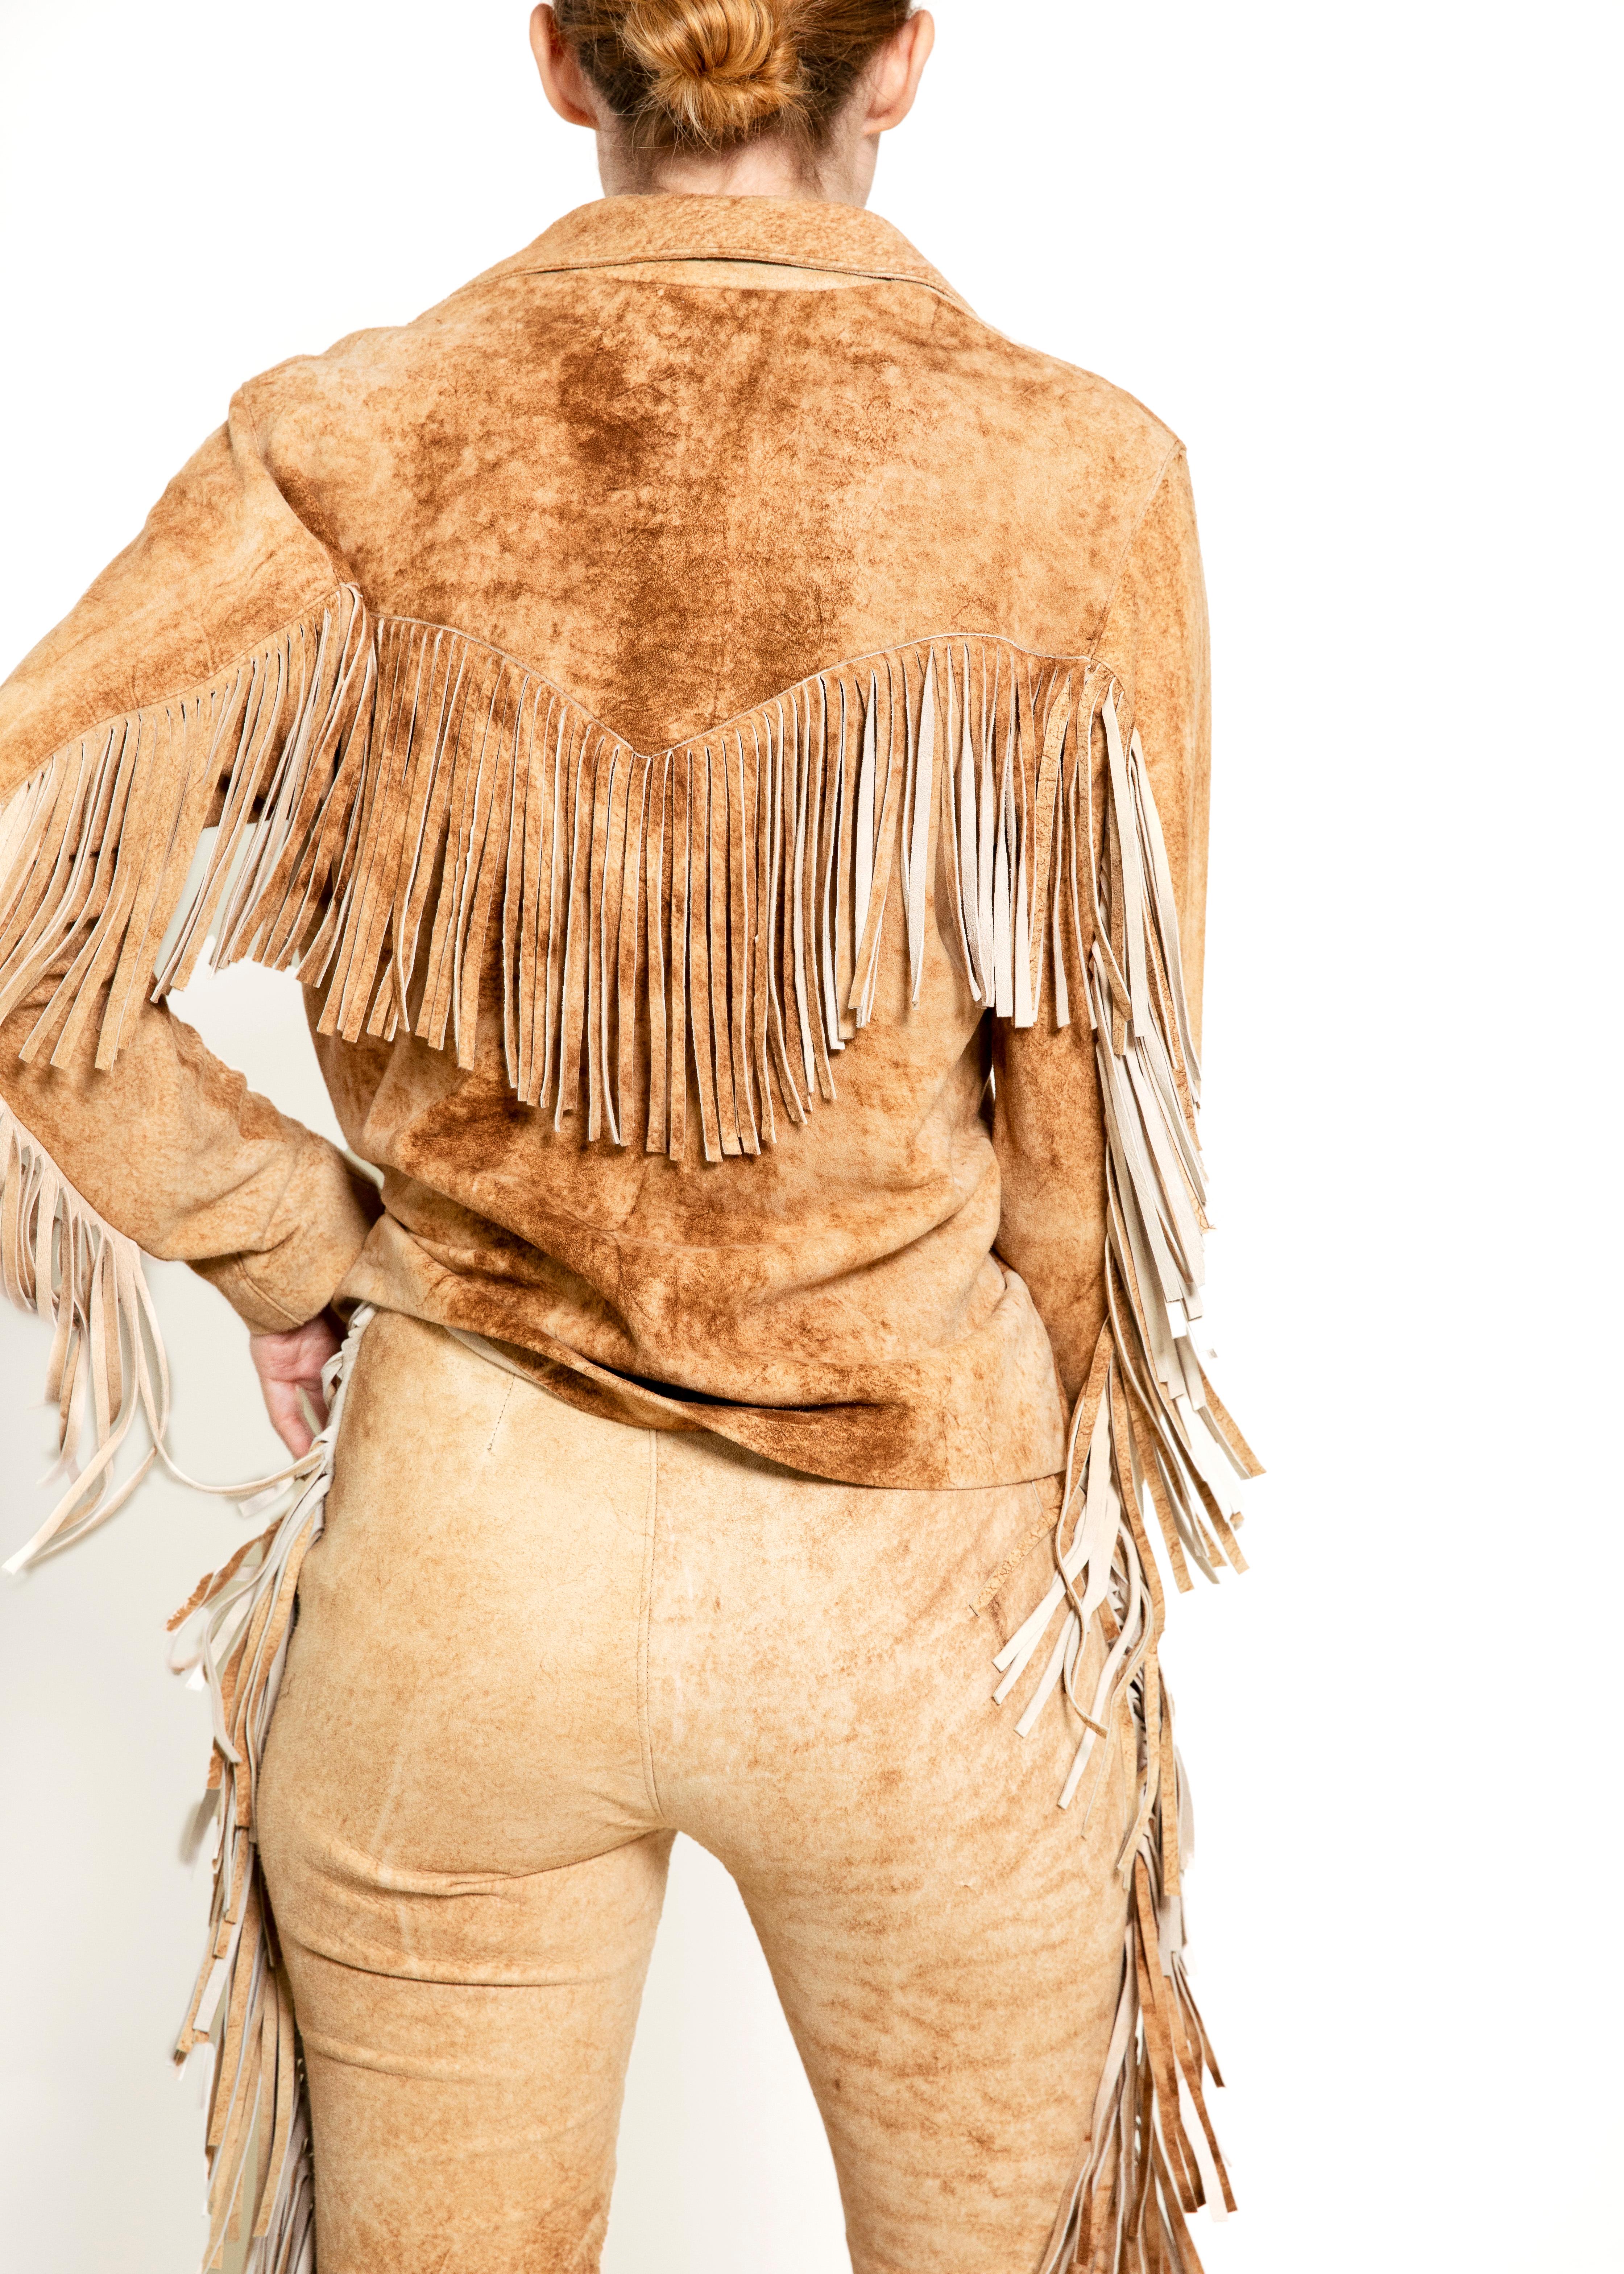 Ralph Lauren Sport Fringe Leather Top & Pant Set In Excellent Condition For Sale In Los Angeles, CA